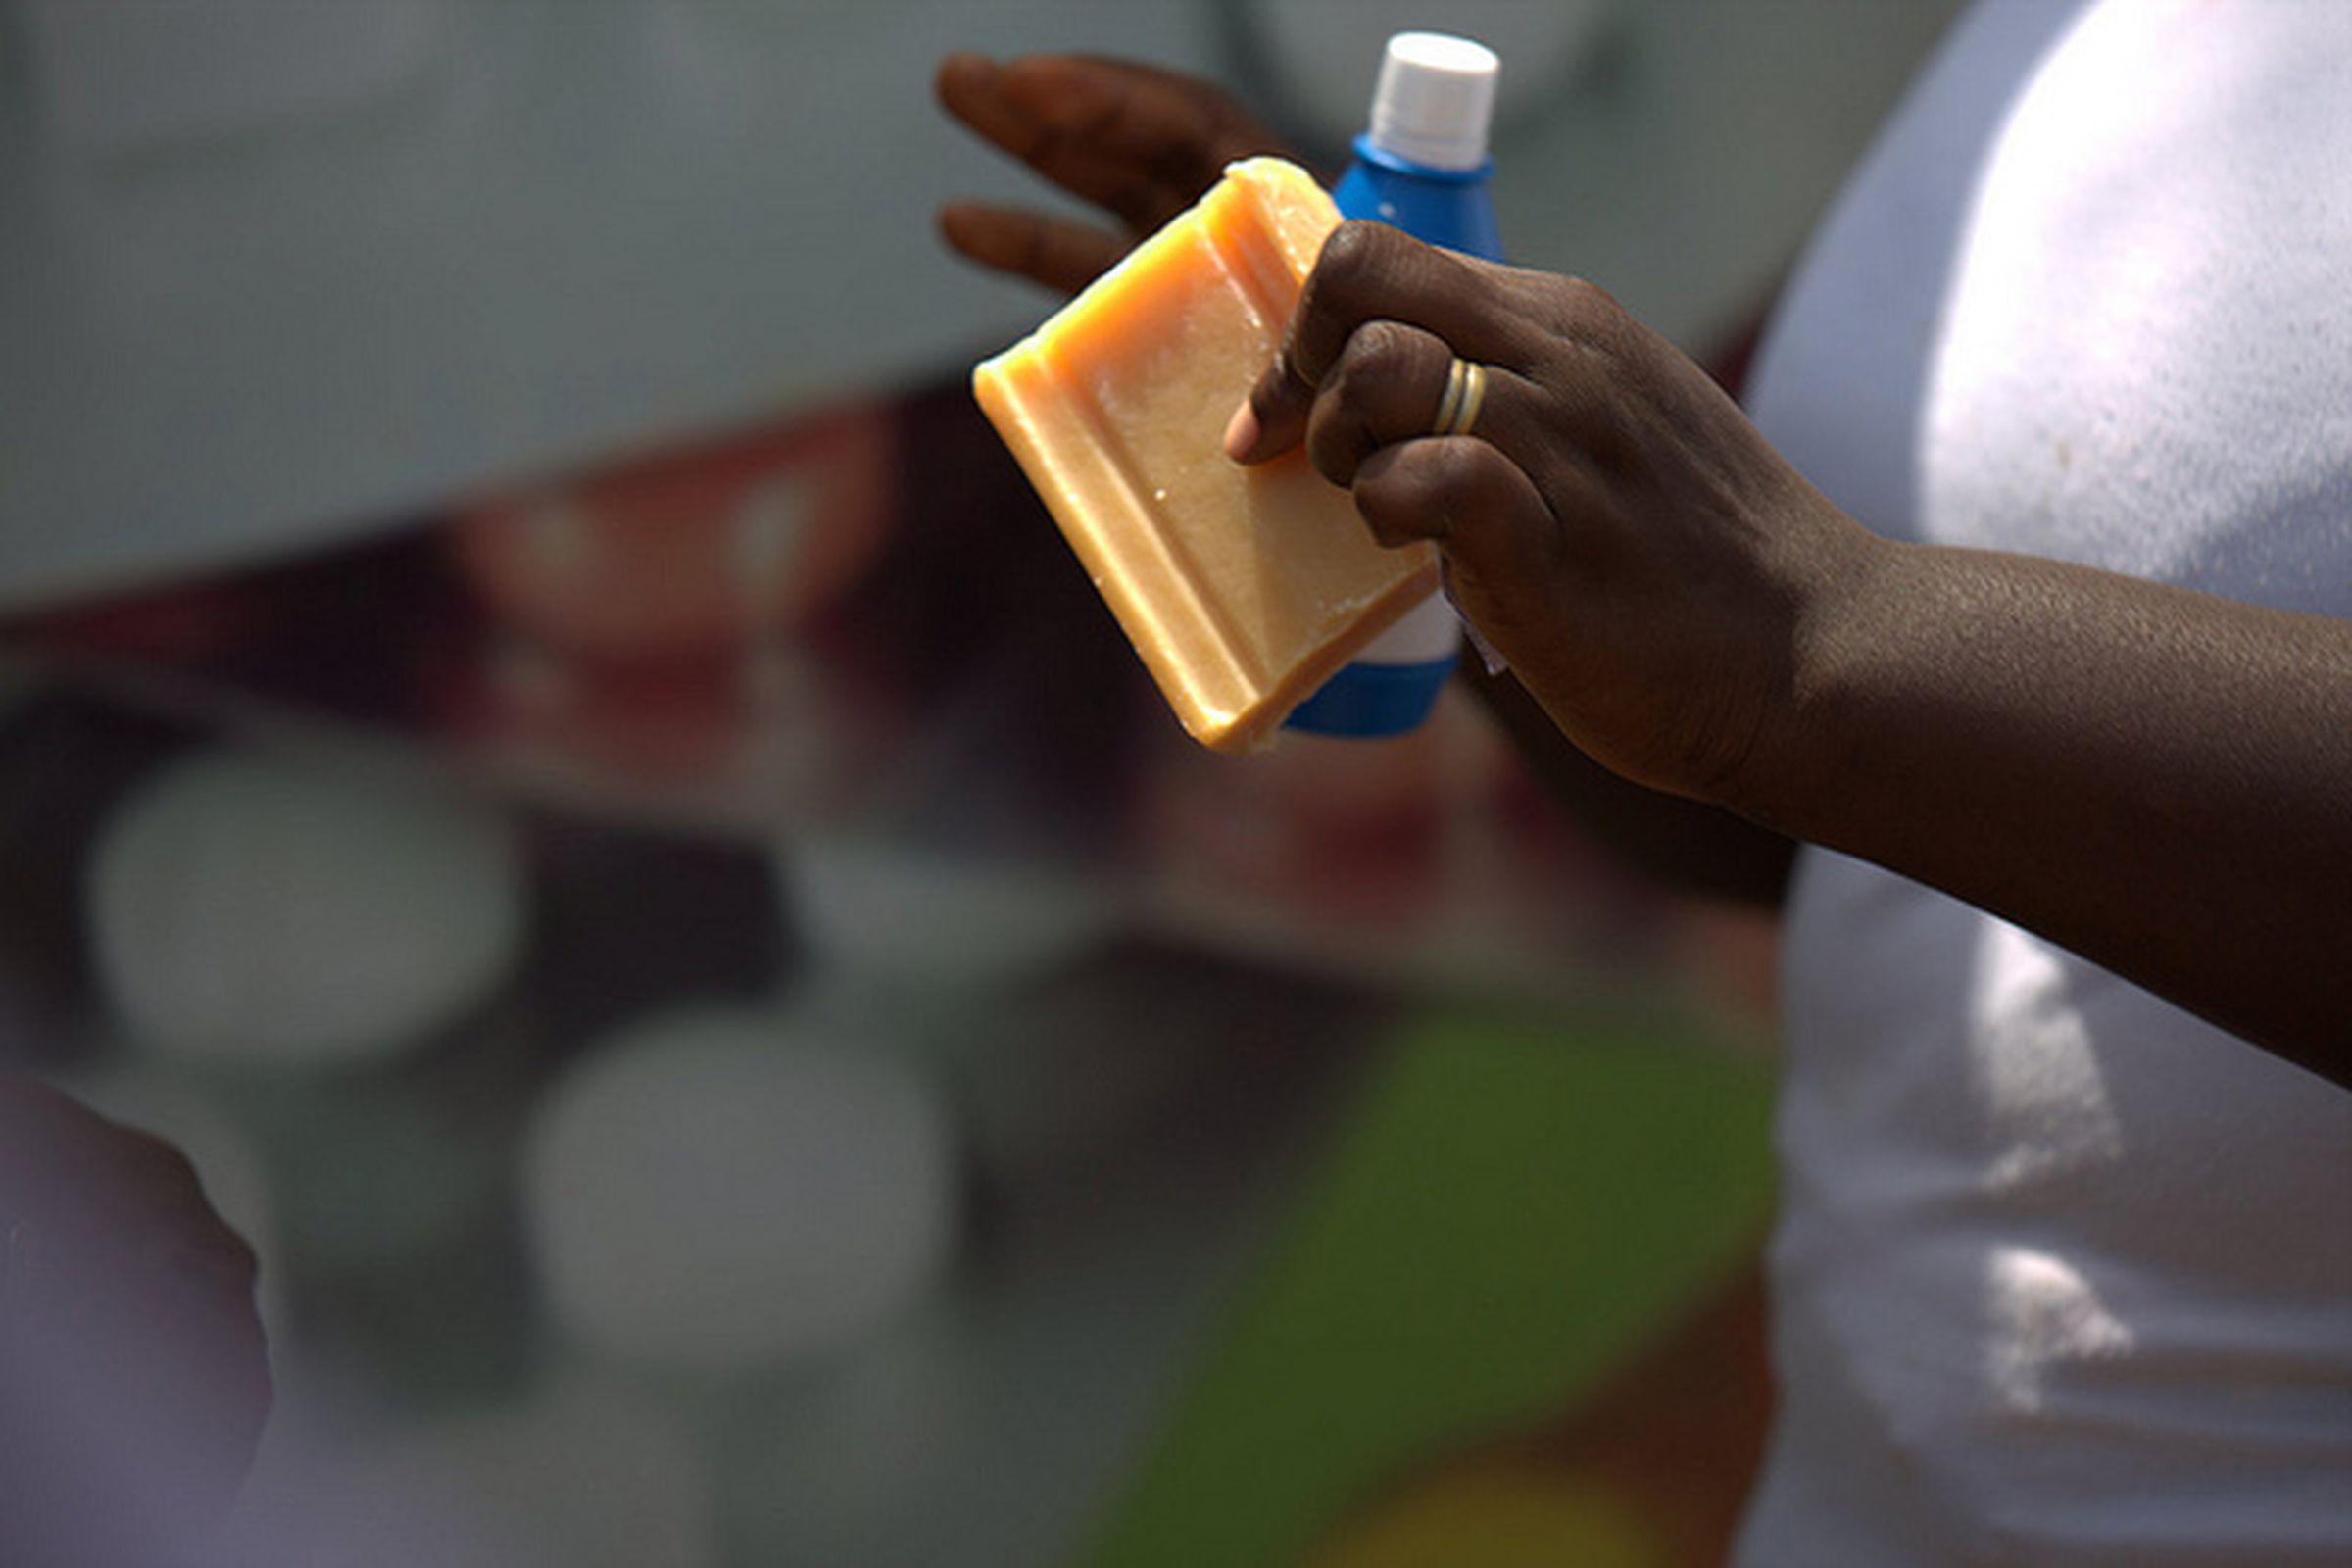 A UNICEF worker in Conakry, Guinea distributing soap and chlorine and teaching residents how to combat ebola.